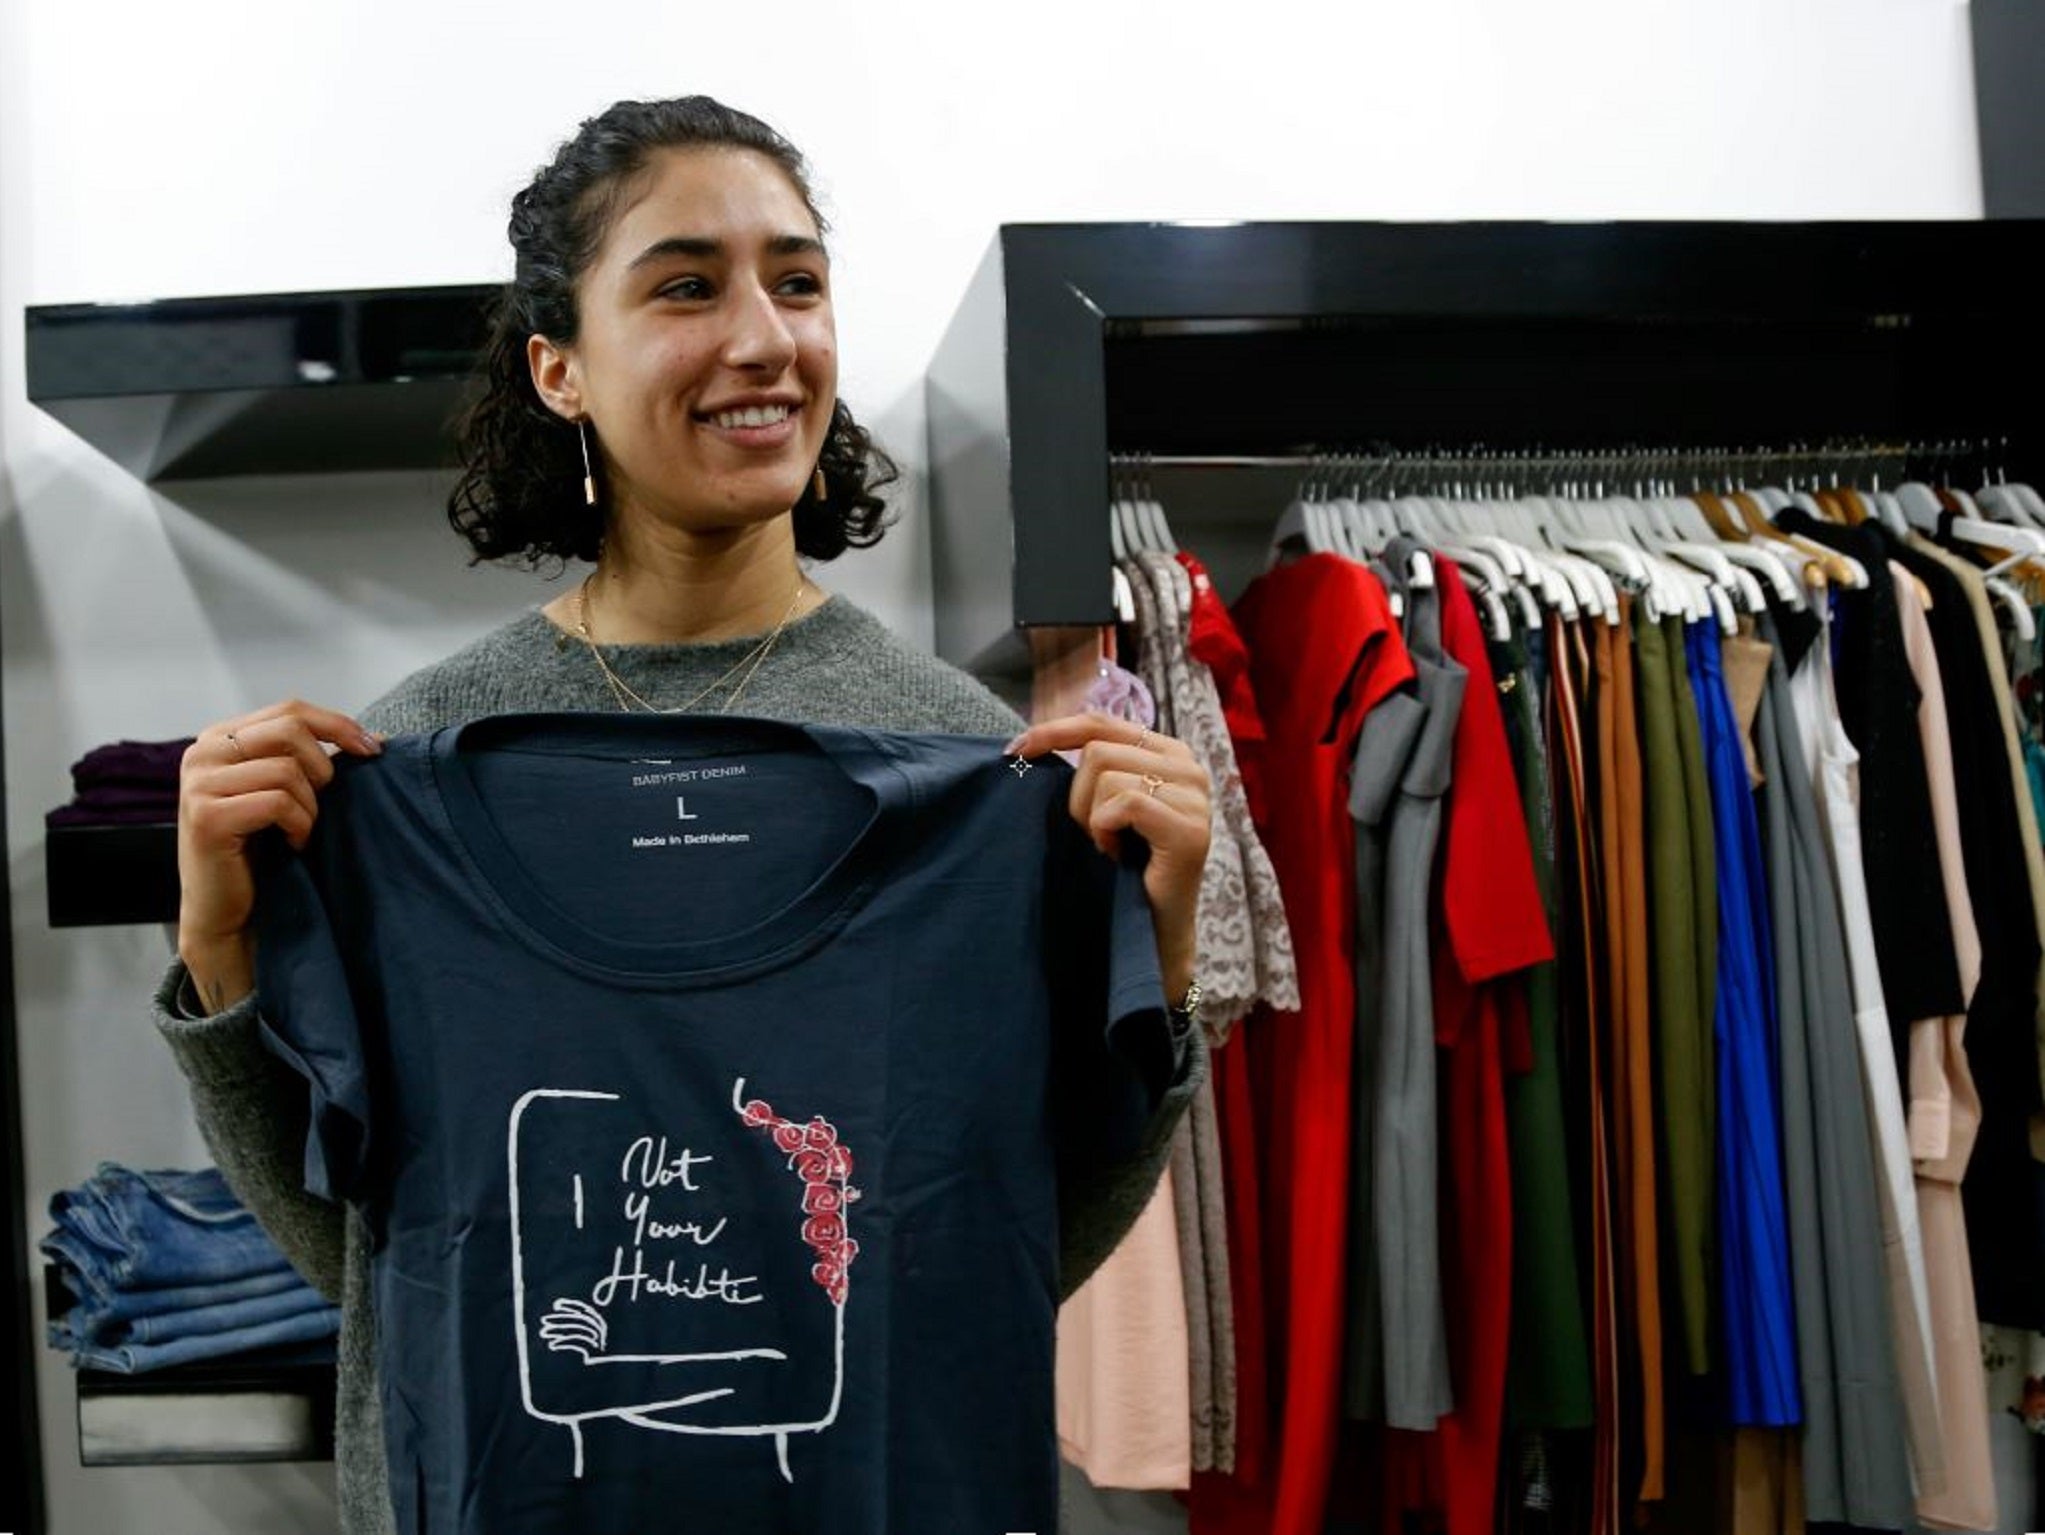 Palestinian-American Yasmeen Mjalli holds one of her T-shirt designs with the slogan 'Not Your Habibti (darling),' as a ready-made retort for cat calls